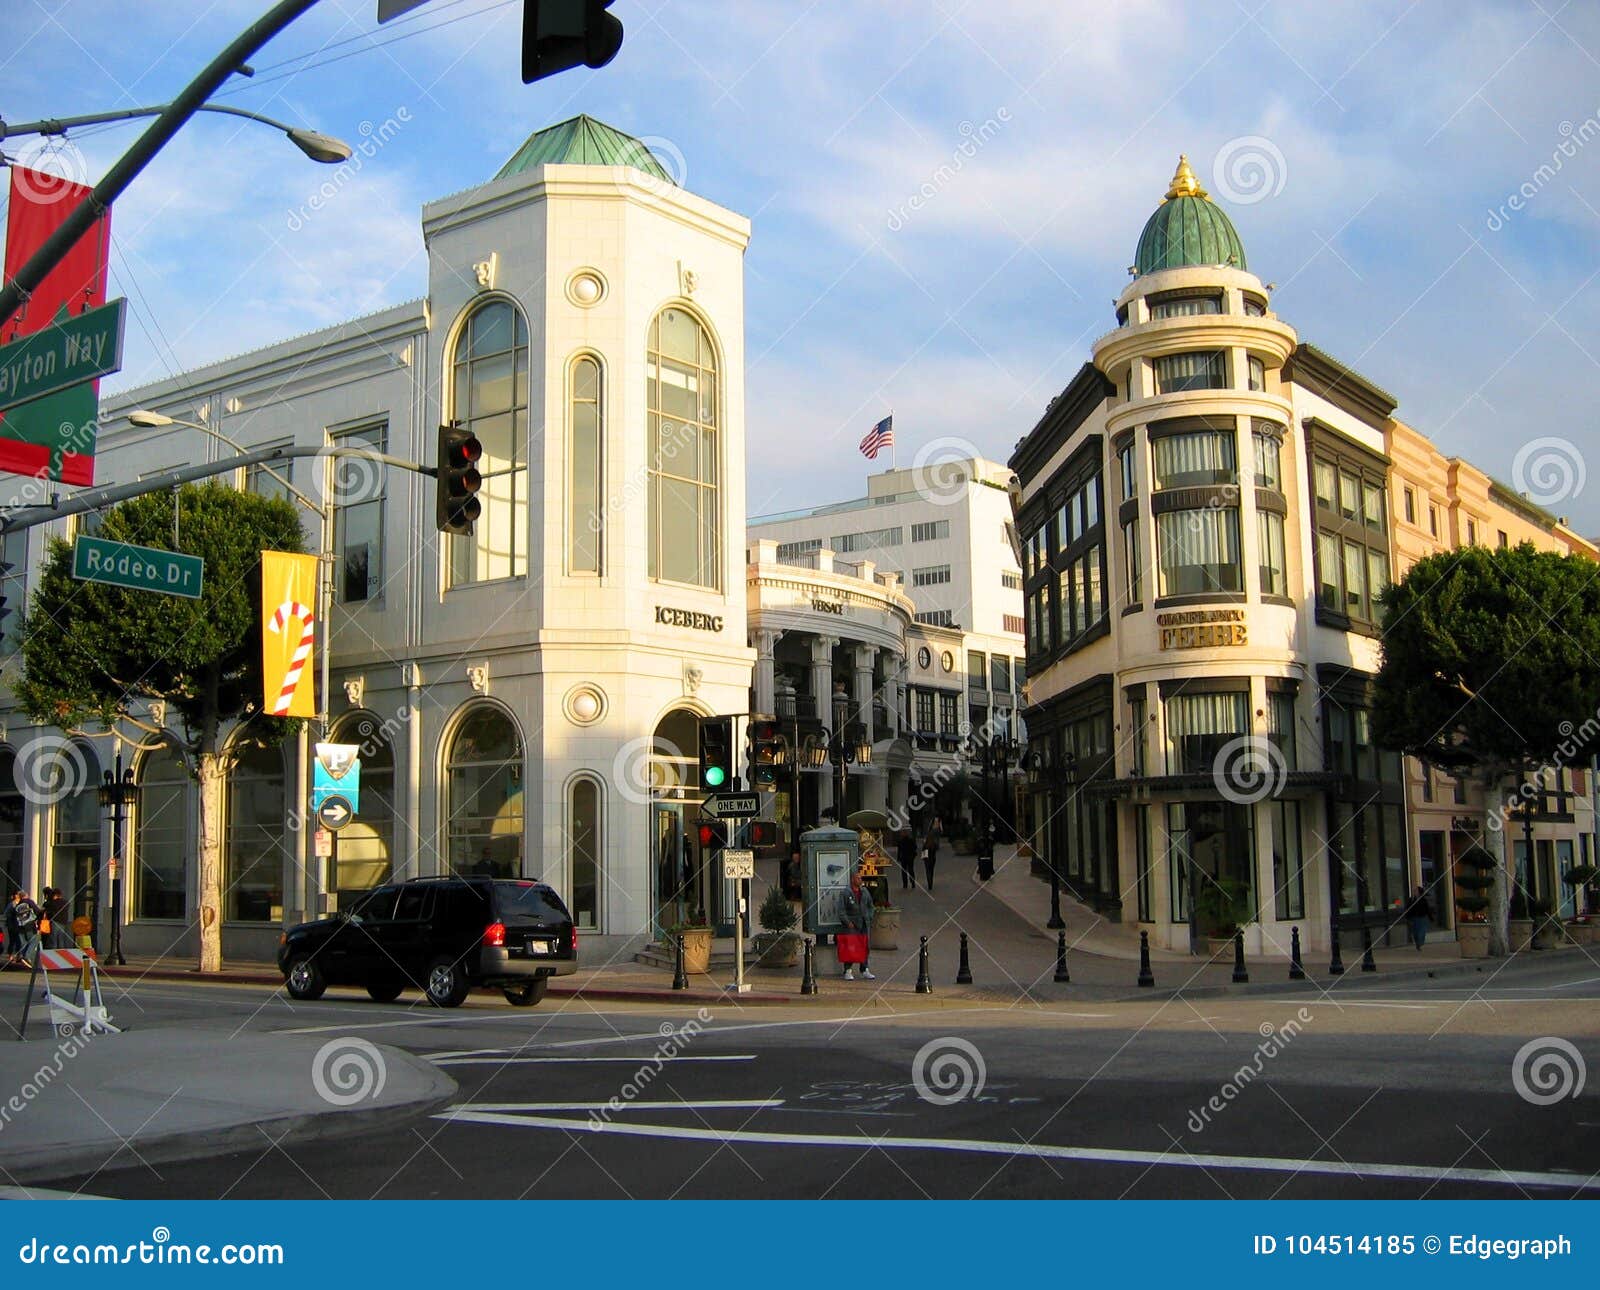 Rodeo Drive, Beverly Hills, California USA Editorial Image - Image of ...